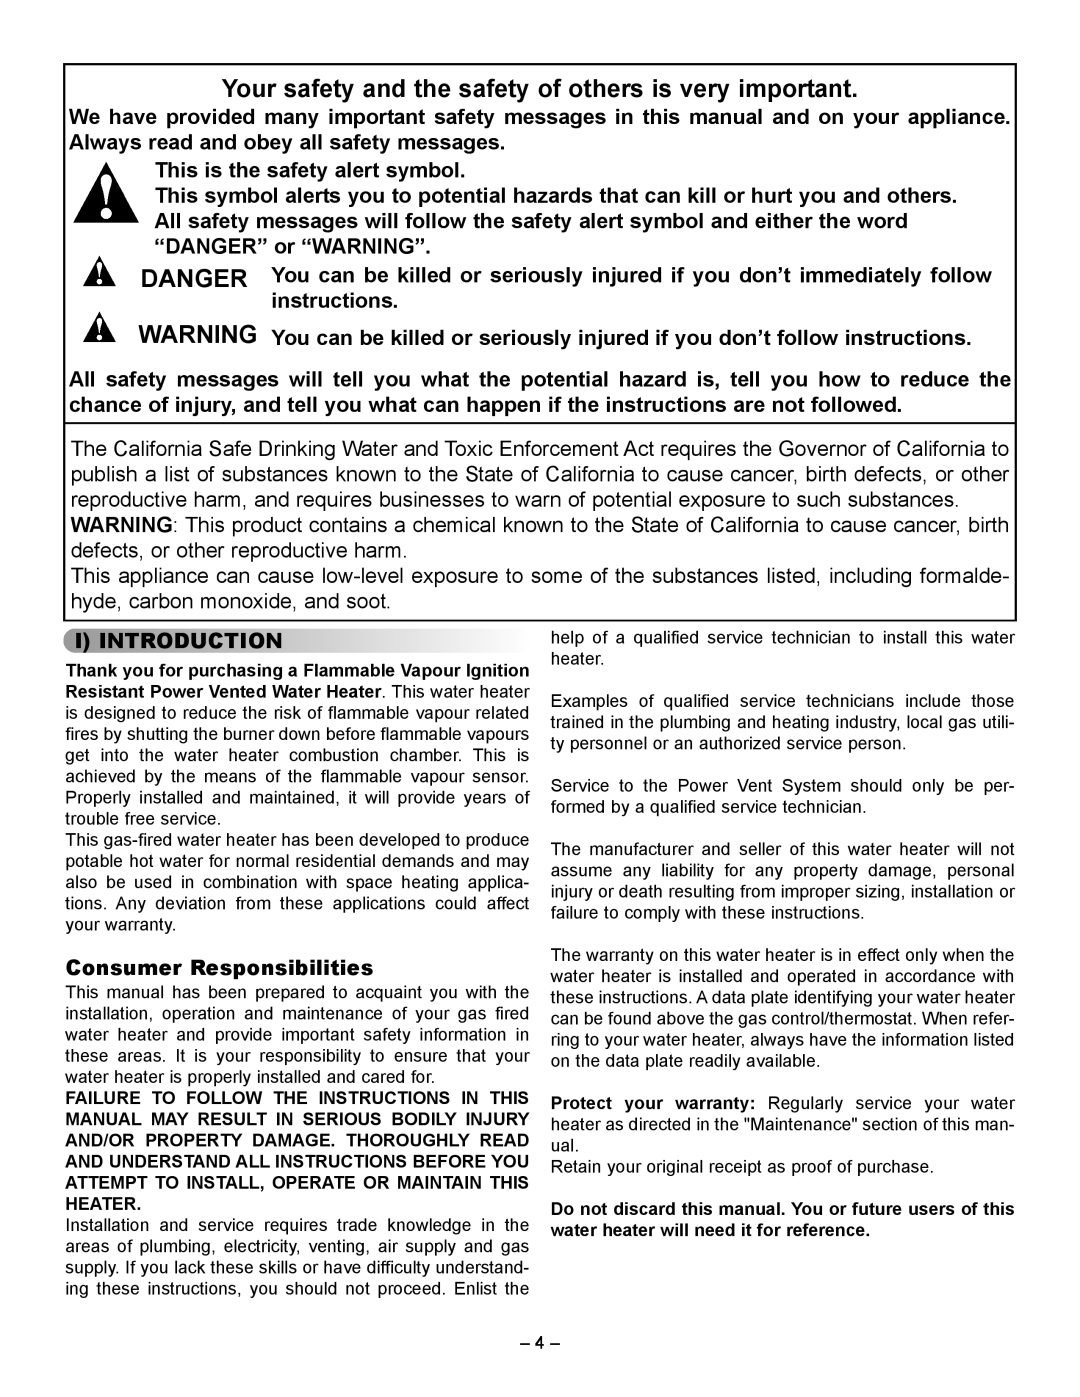 GSW 5065 manual This is the safety alert symbol, I Introduction, Consumer Responsibilities 